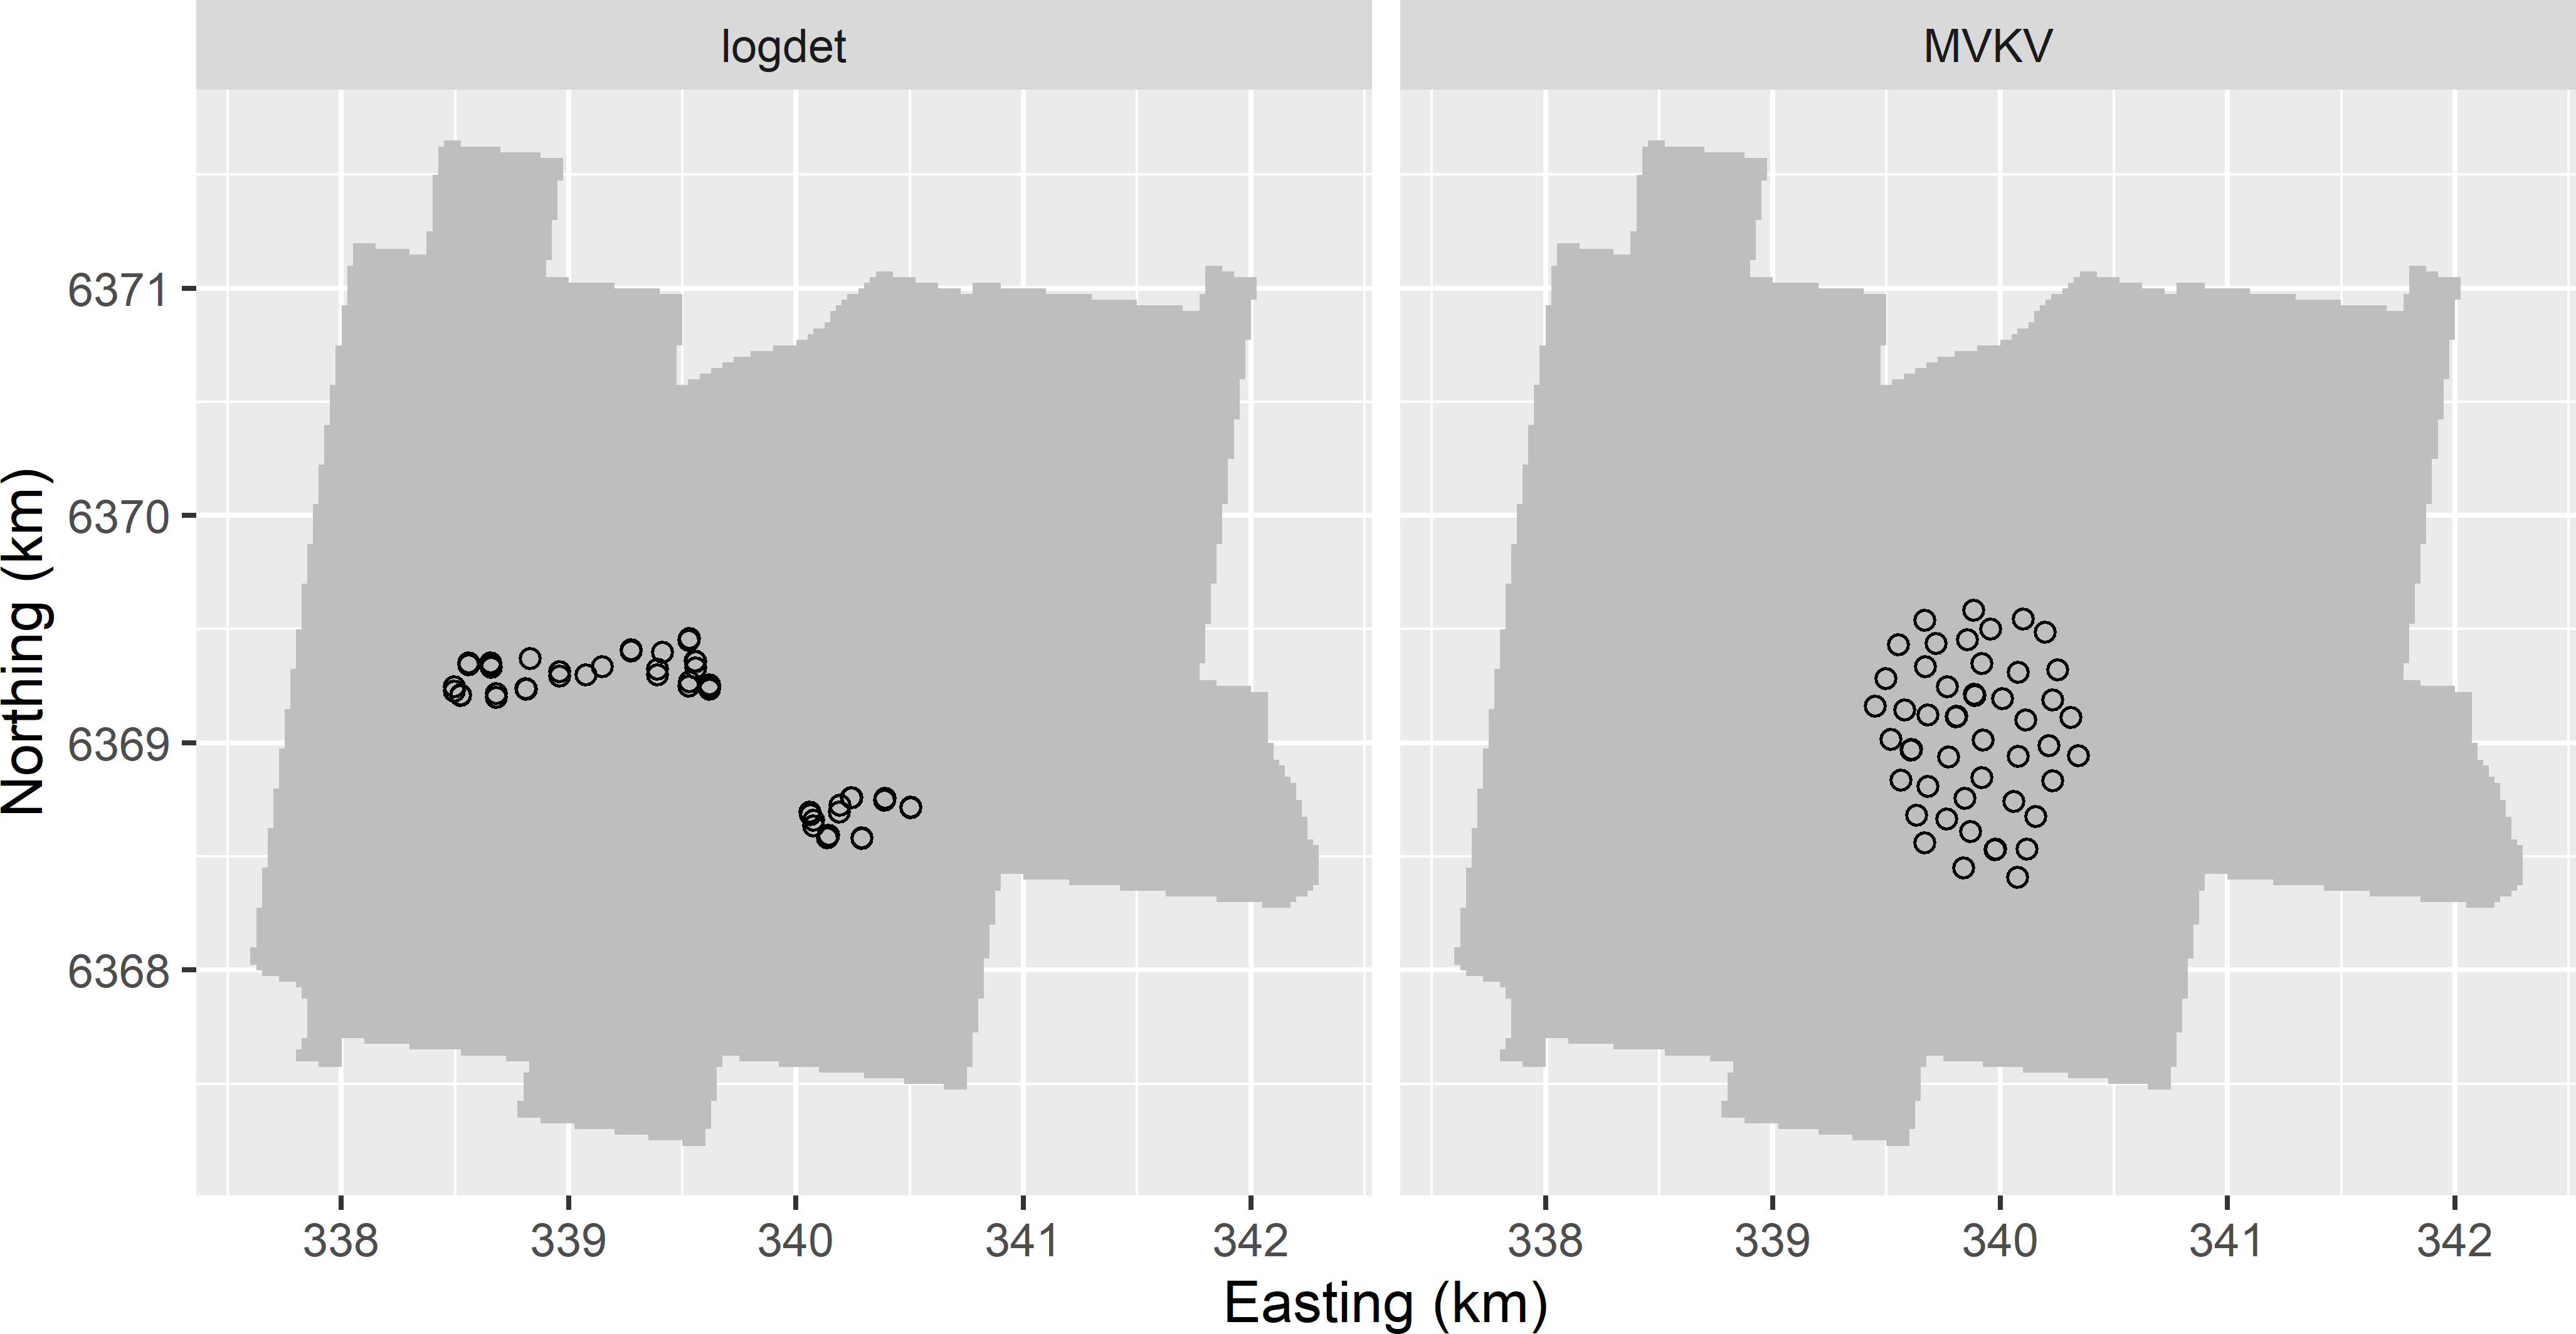 Optimised sampling pattern of 100 points for semivariogram estimation, using the log of the determinant of the inverse Fisher information matrix of the semivariogram parameters (logdet) and the mean estimation variance of the kriging variance (MVKV) as a minimisation criterion.